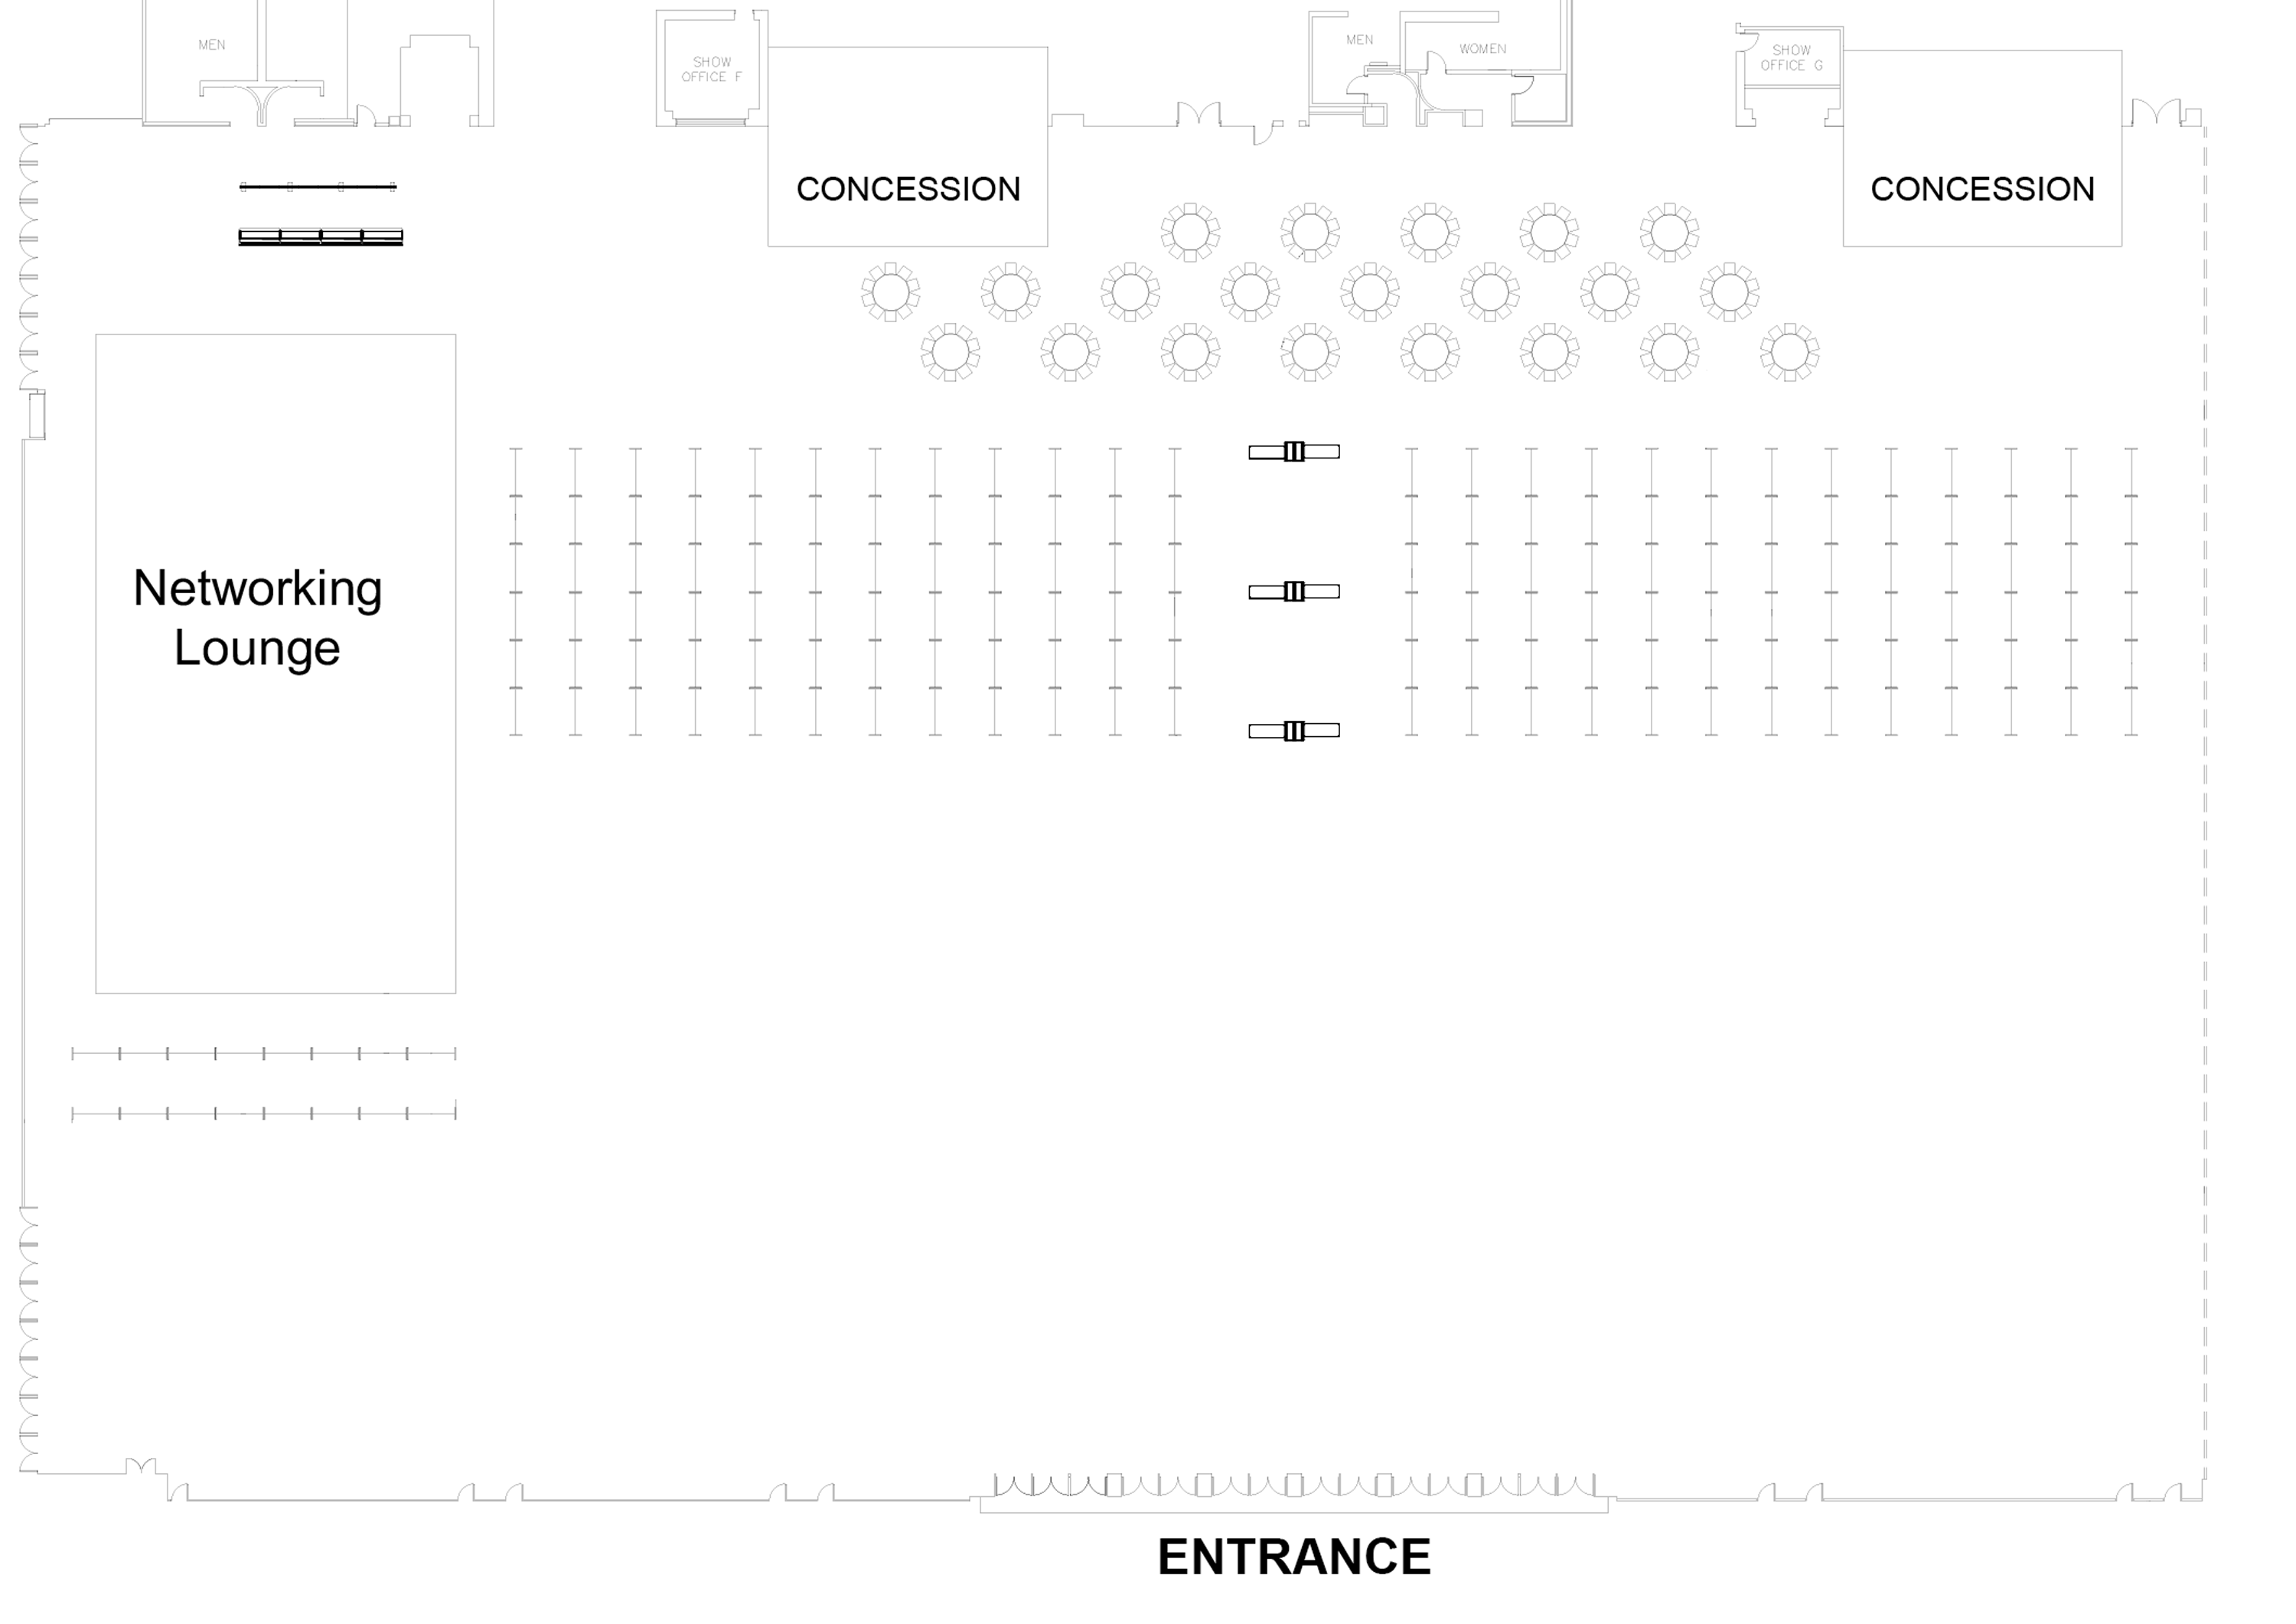 HOPA Annual Conference 2023 Floor Plan